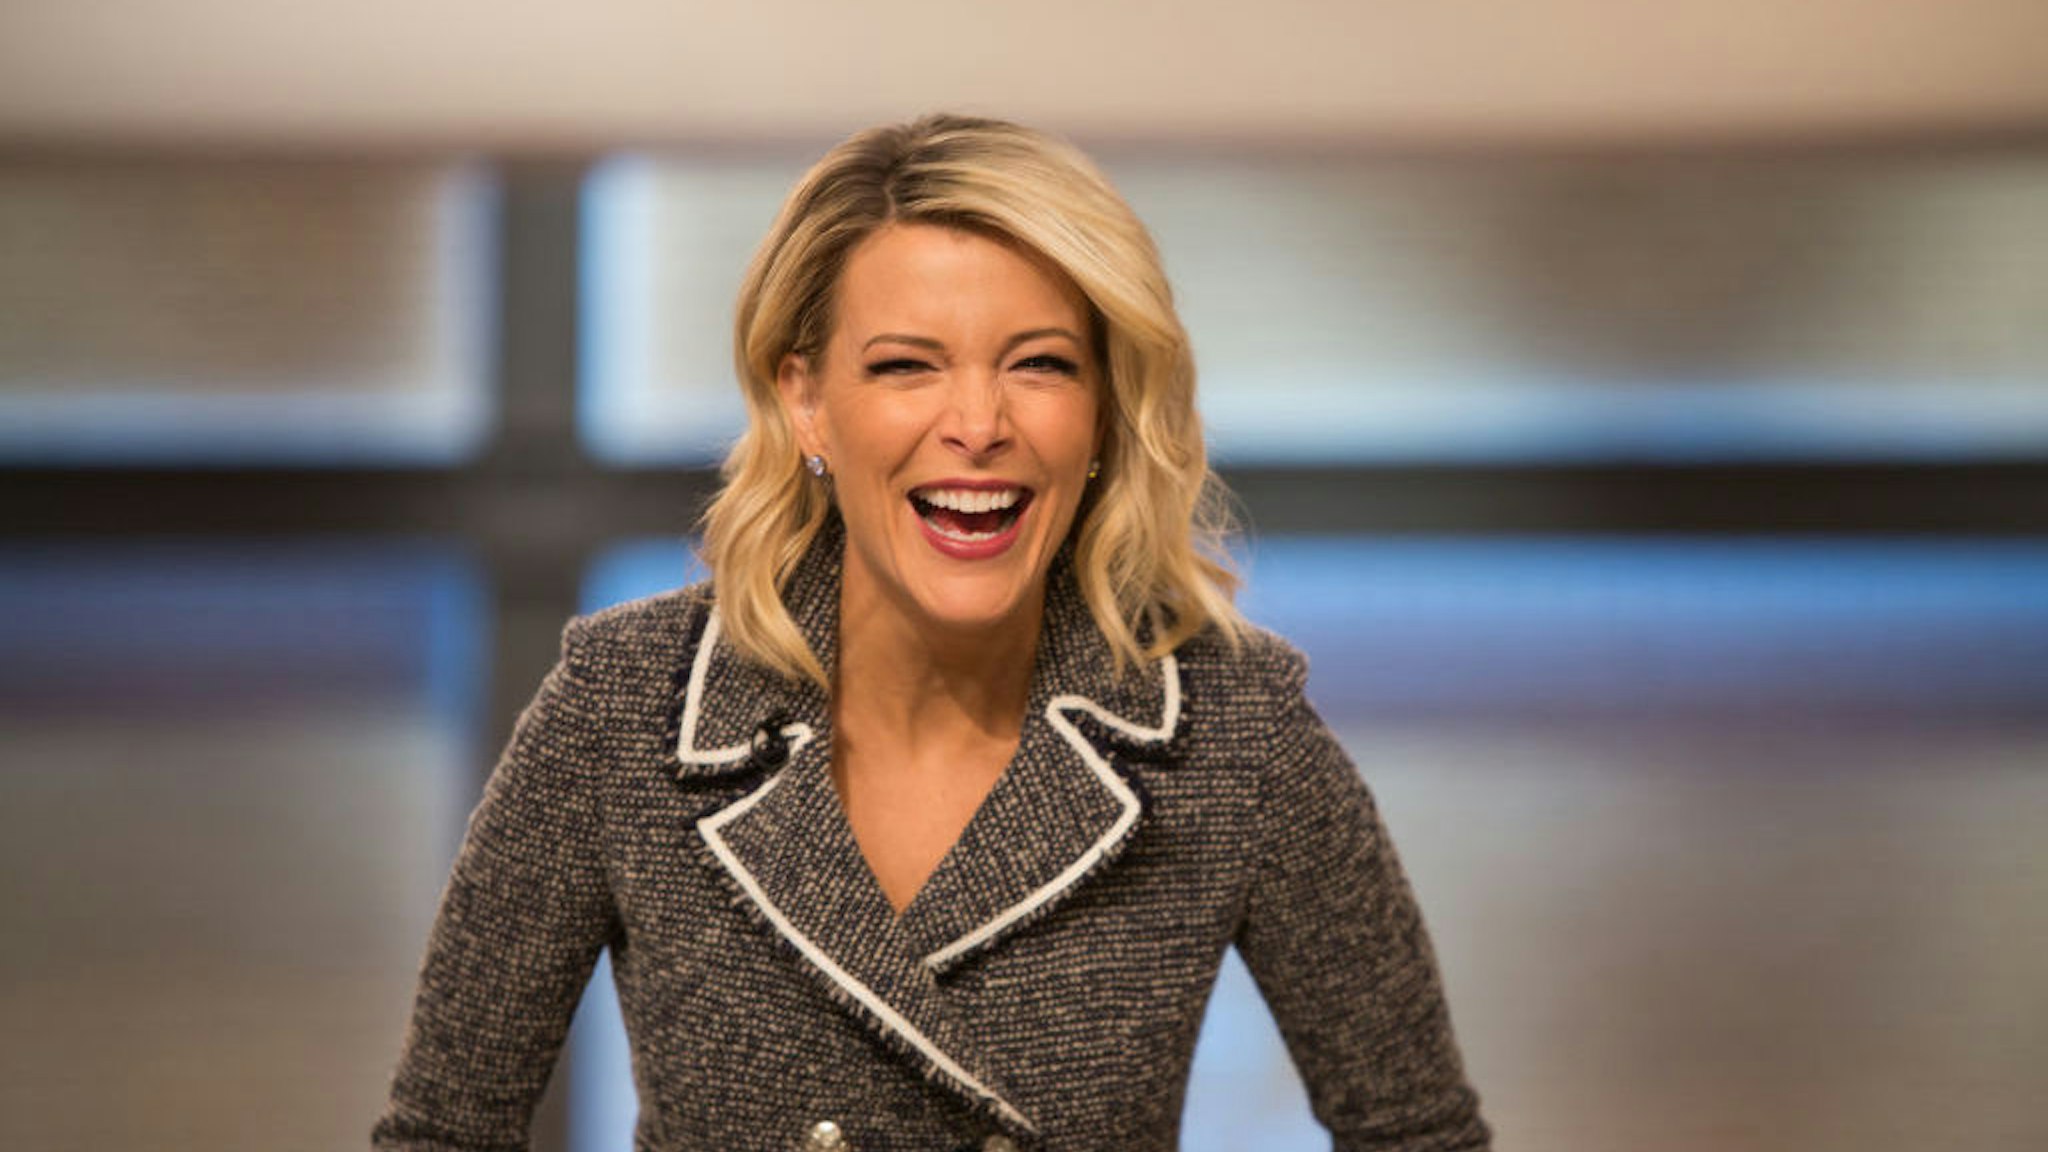 MEGYN KELLY TODAY -- Pictured: Megyn Kelly on Wednesday, December 3, 2018 -- (Photo by: Nathan Congleton/NBC/NBCU Photo Bank)